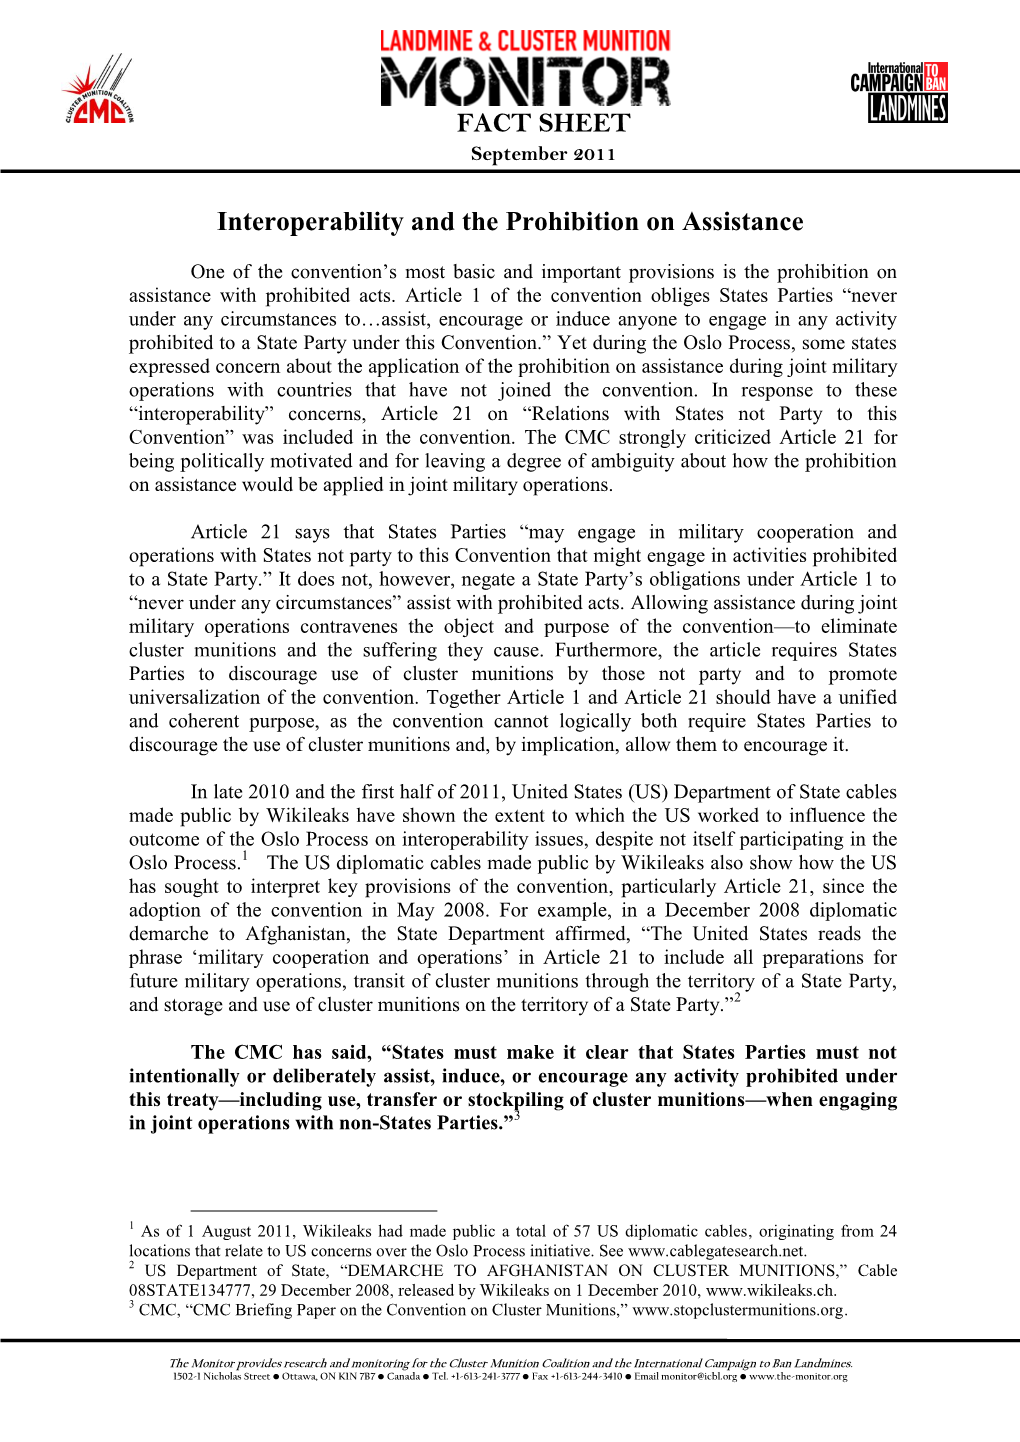 FACT SHEET Interoperability and the Prohibition on Assistance